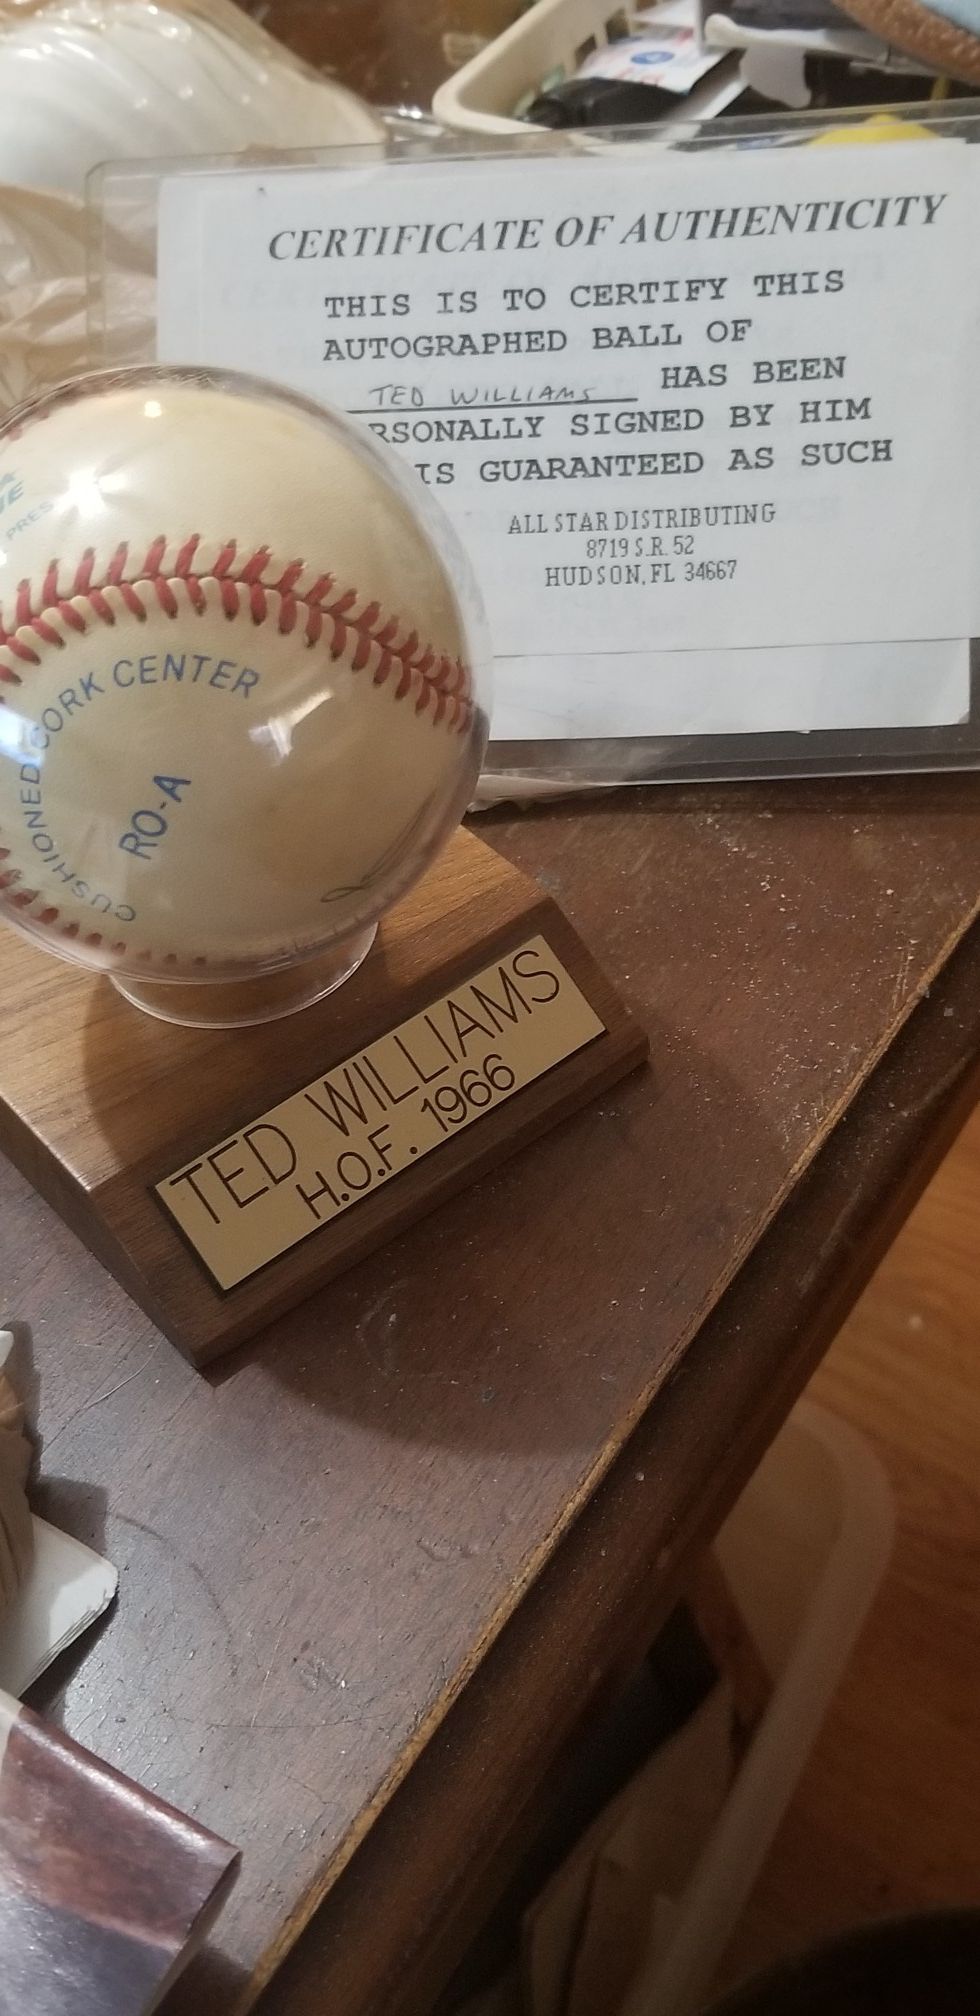 Ted William's hall of fame signed